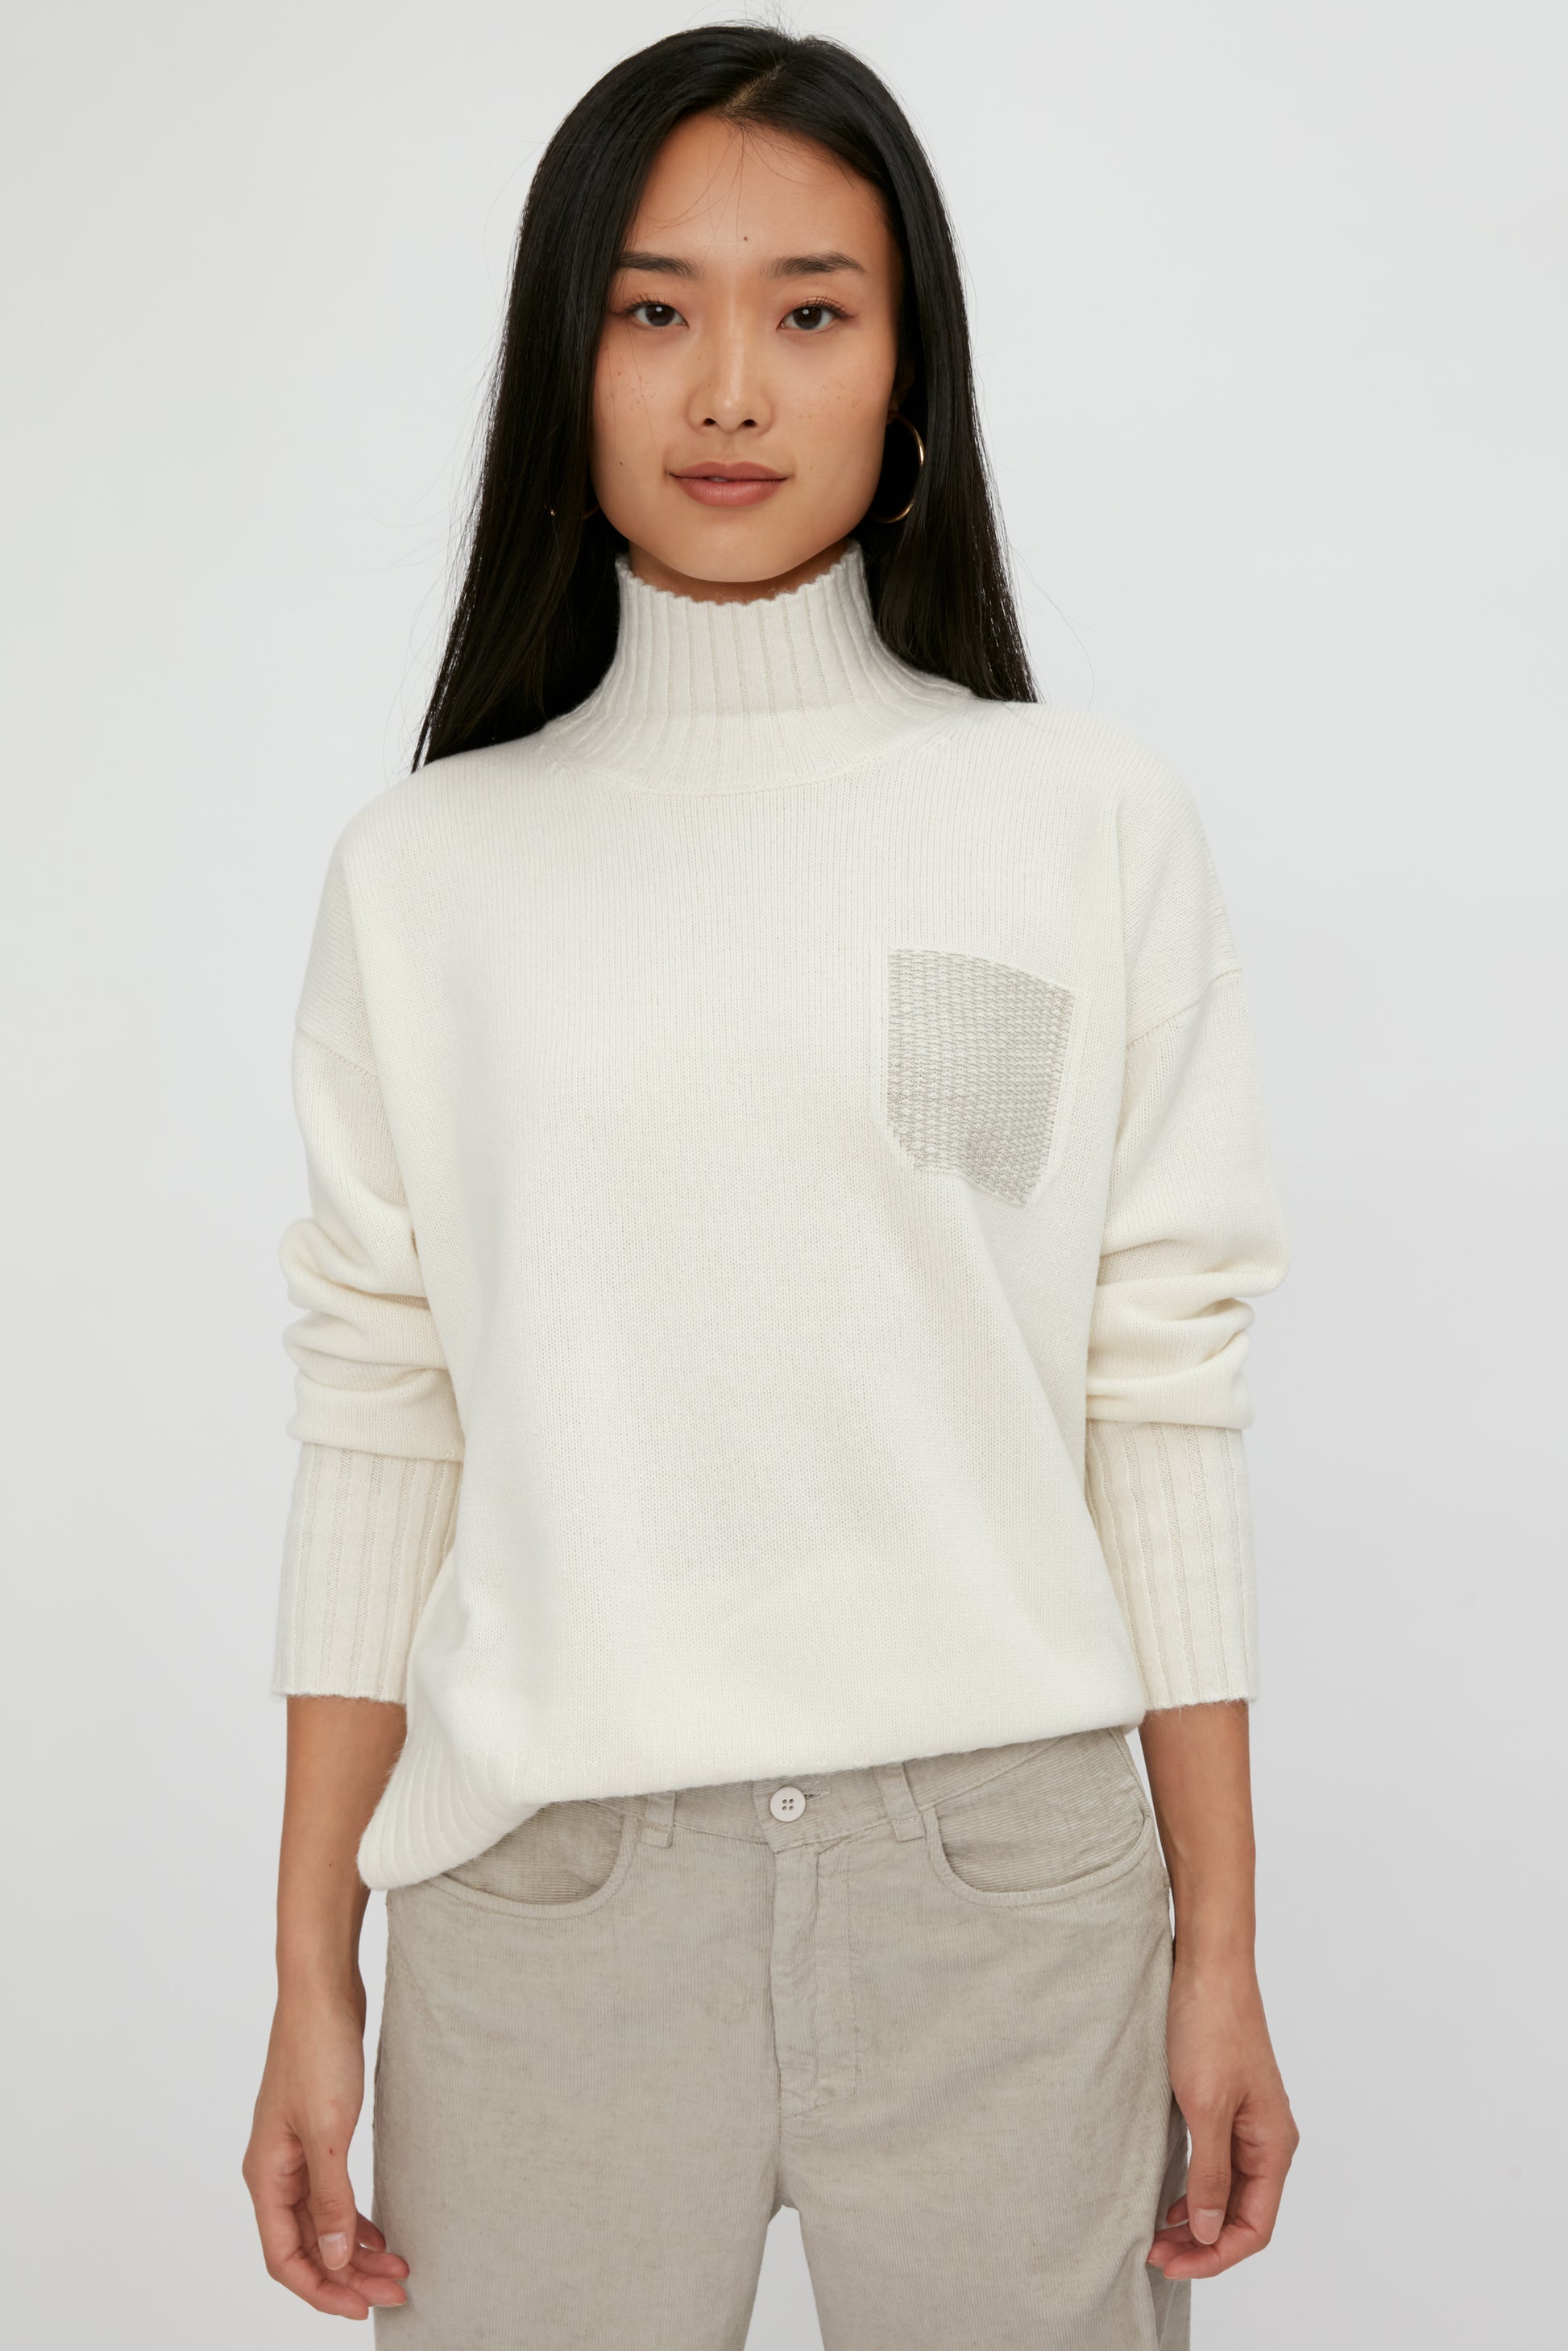 PESERICO Wool Silk Cashmere Sweater in First Snow